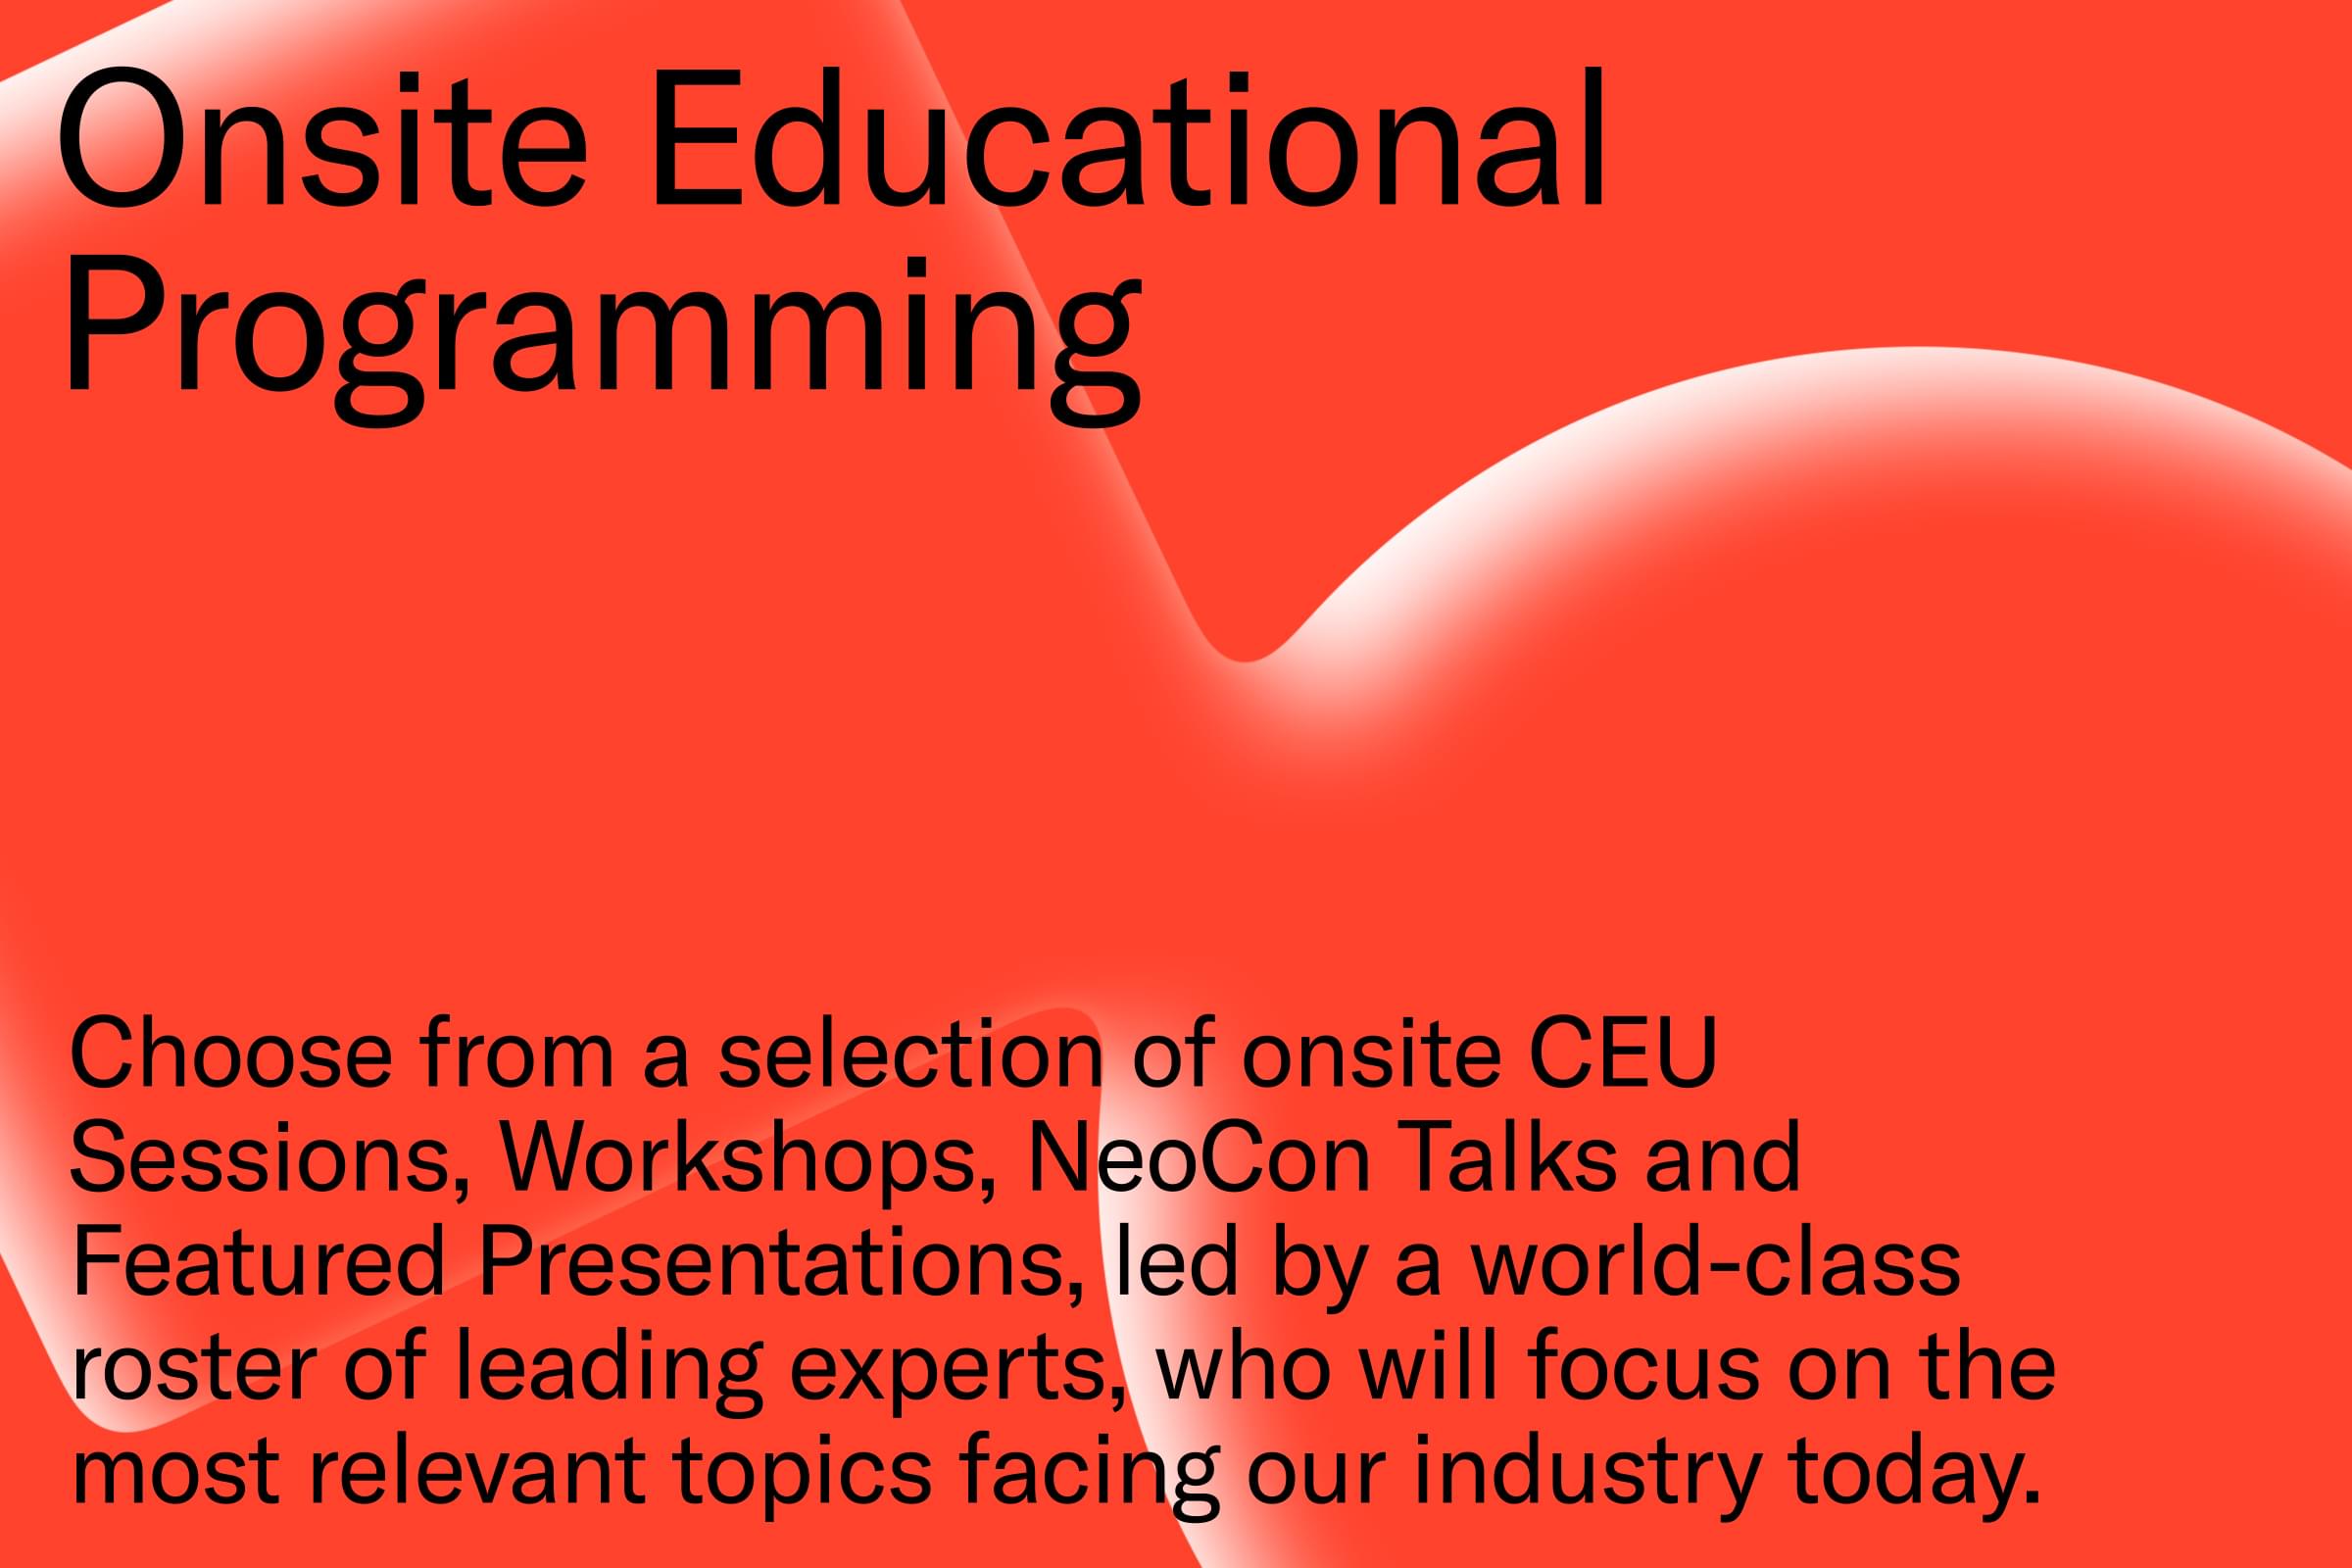 Onsite Educational Programming - Choose from a selection of onsite CEU Sessions, Workshops, NeoCon Talks and Featured Presentations, led by a world-class roster of leading experts, who will focus on the most relevant topics facing our industry today.